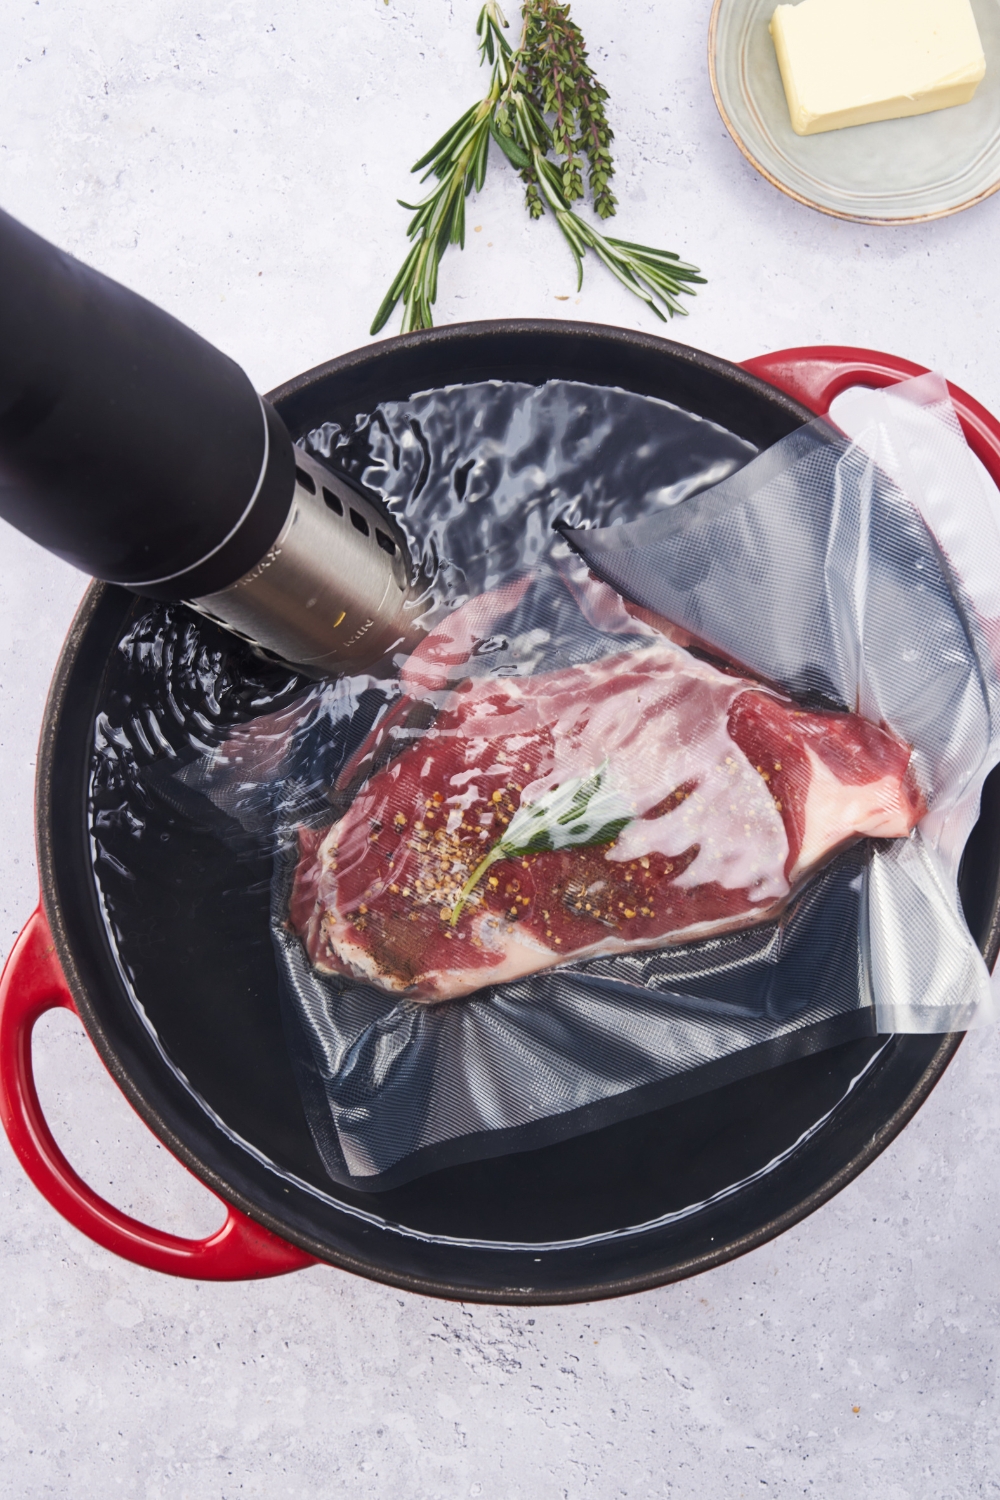 A steak inside a vacuum-sealed bag being sous vide in a water bath.